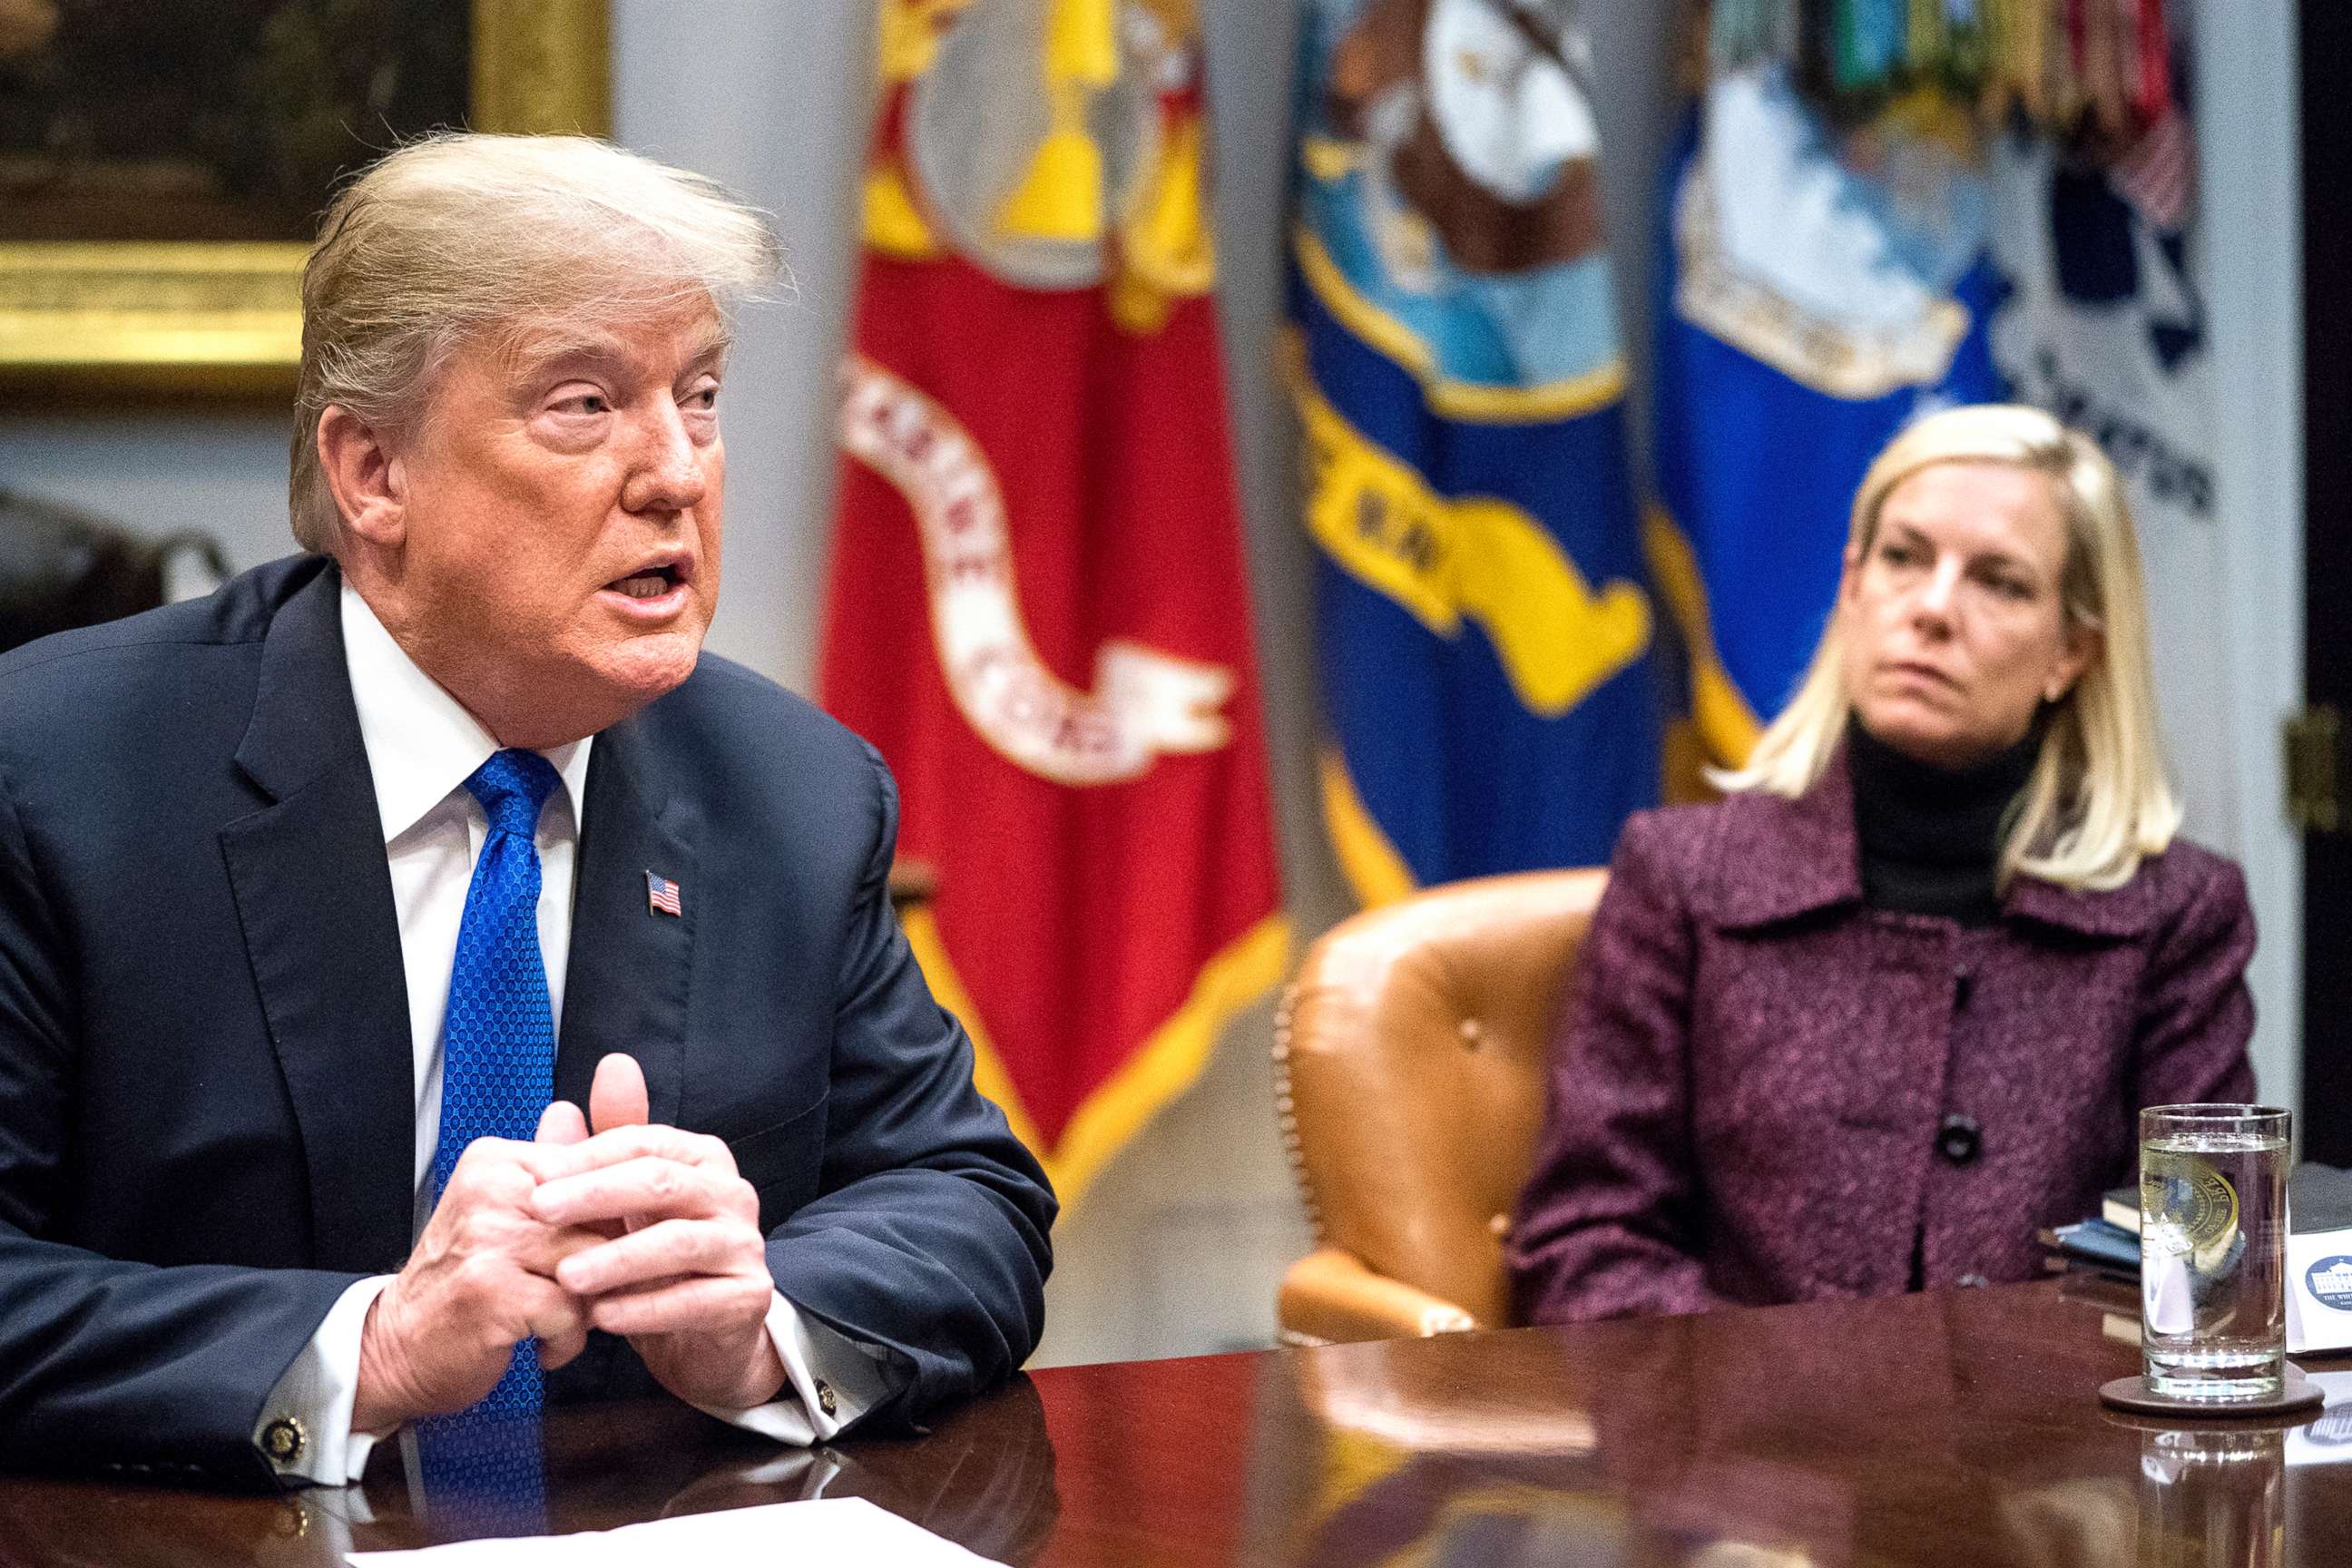 PHOTO: President Donald Trump, accompanied by Secretary of Homeland Security Kirstjen Nielsen, speaks during a meeting with Republican Senators on immigration in the Roosevelt Room at the White House, Jan. 4, 2018.